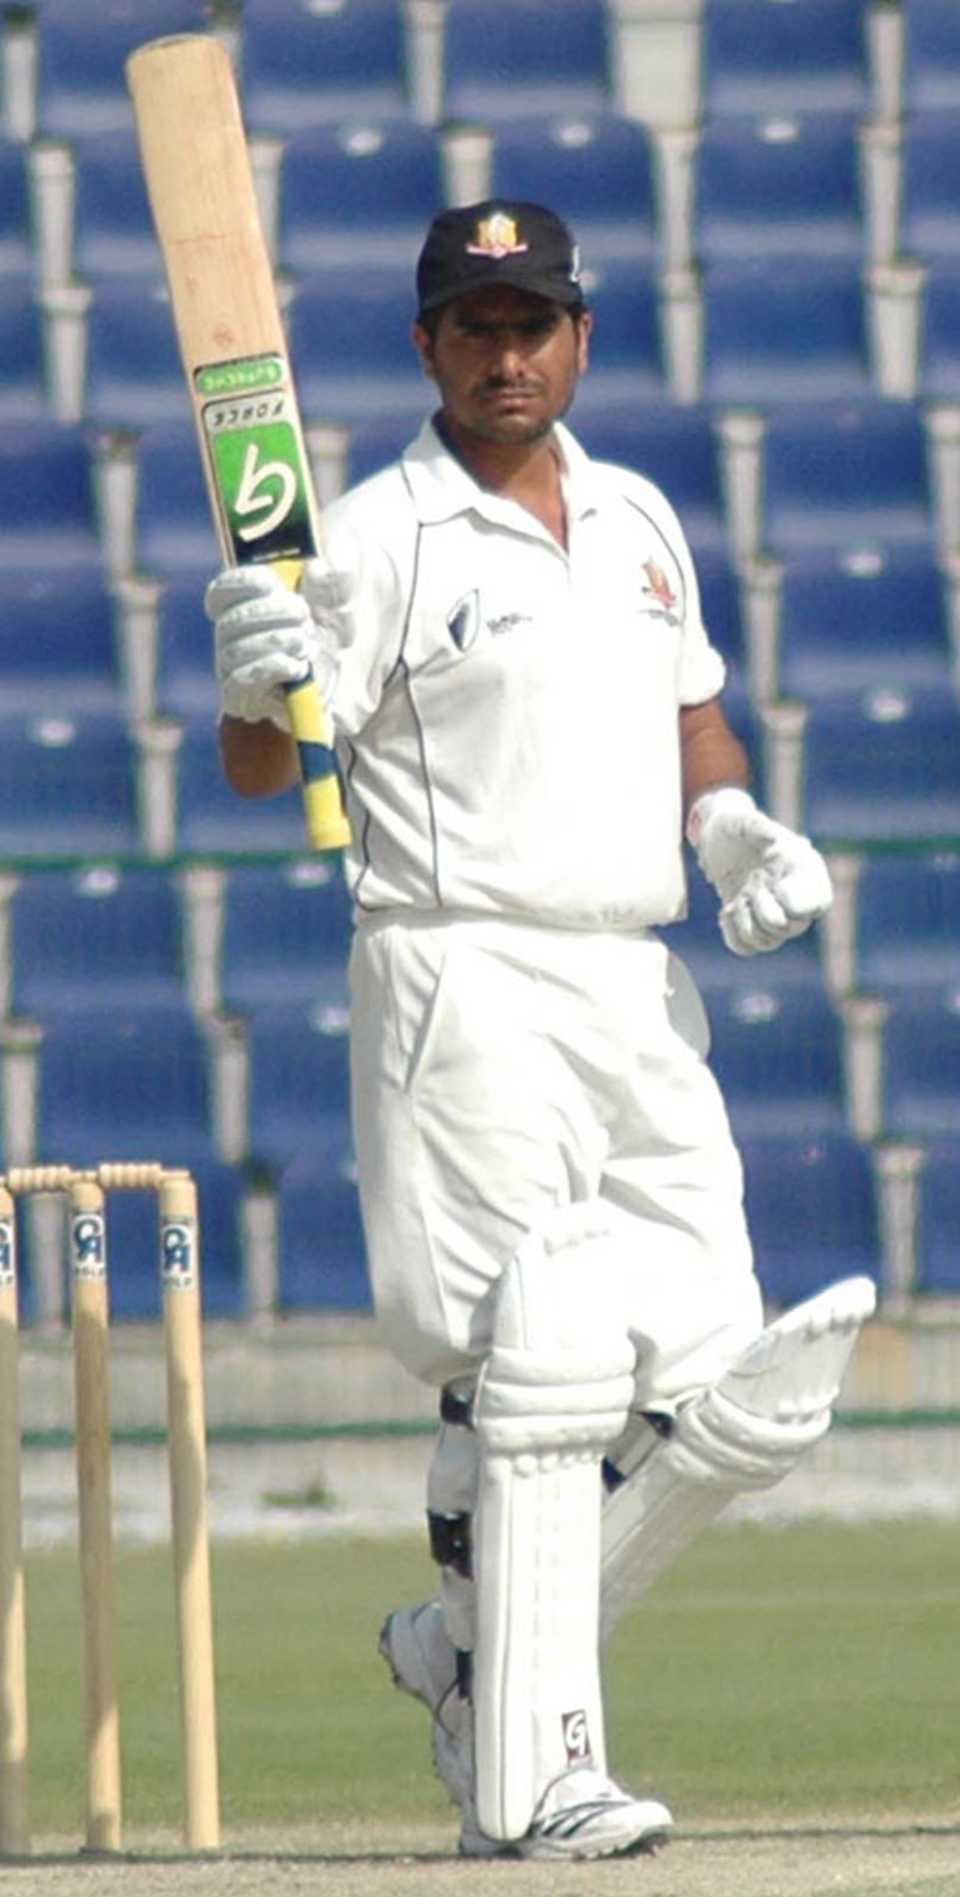 UAE's captain, Saqib Ali, scored 195 out of a total of 306 